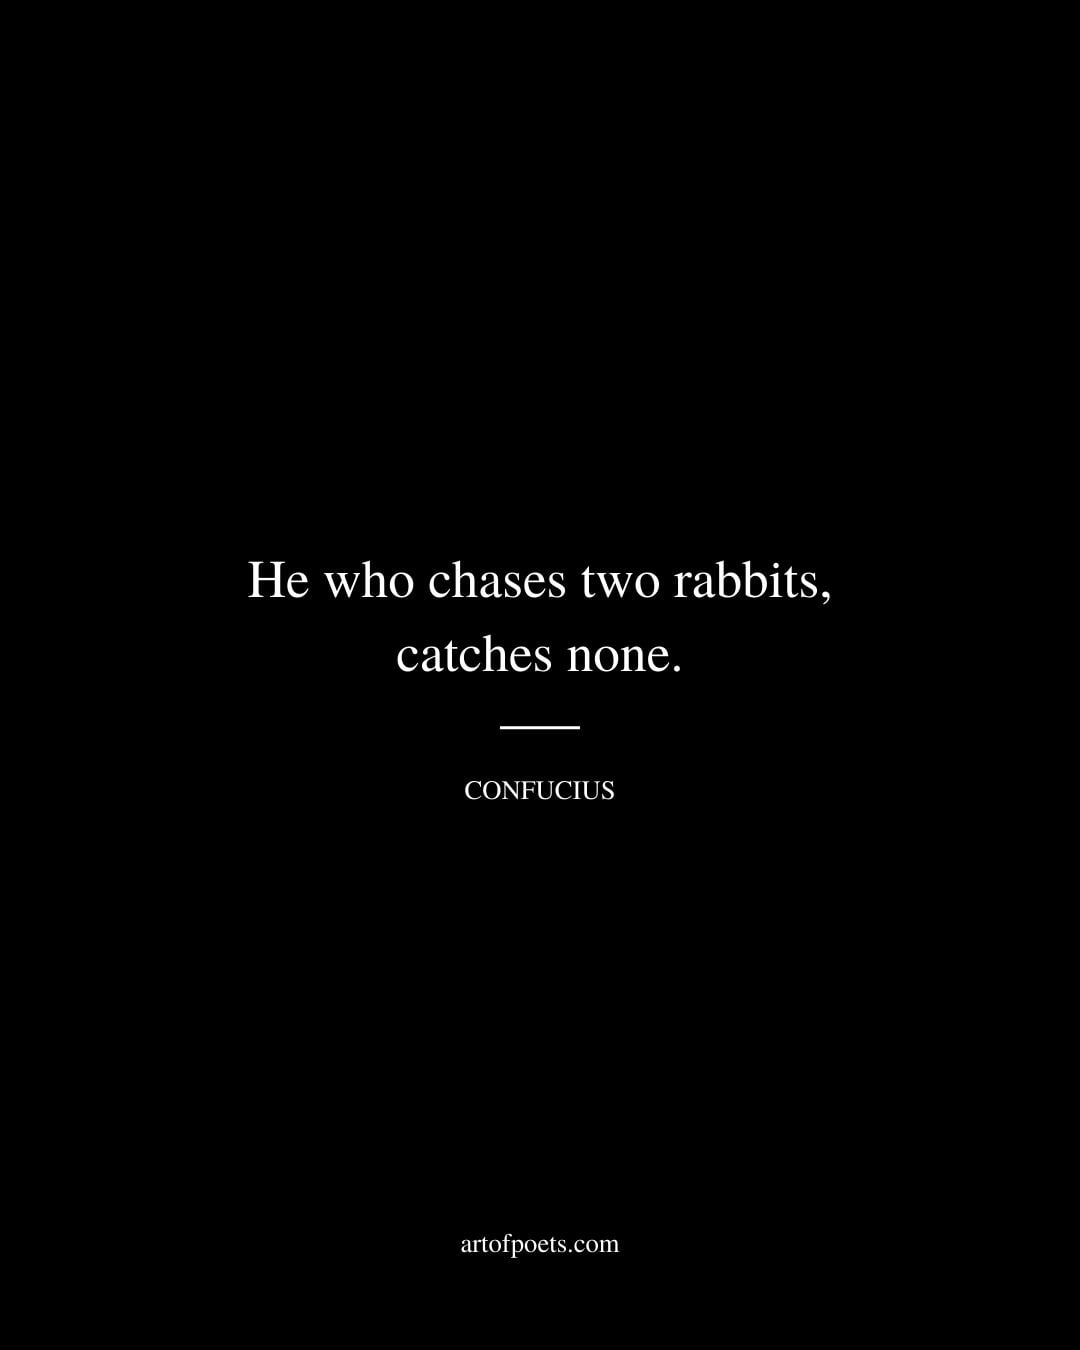 He who chases two rabbits catches none